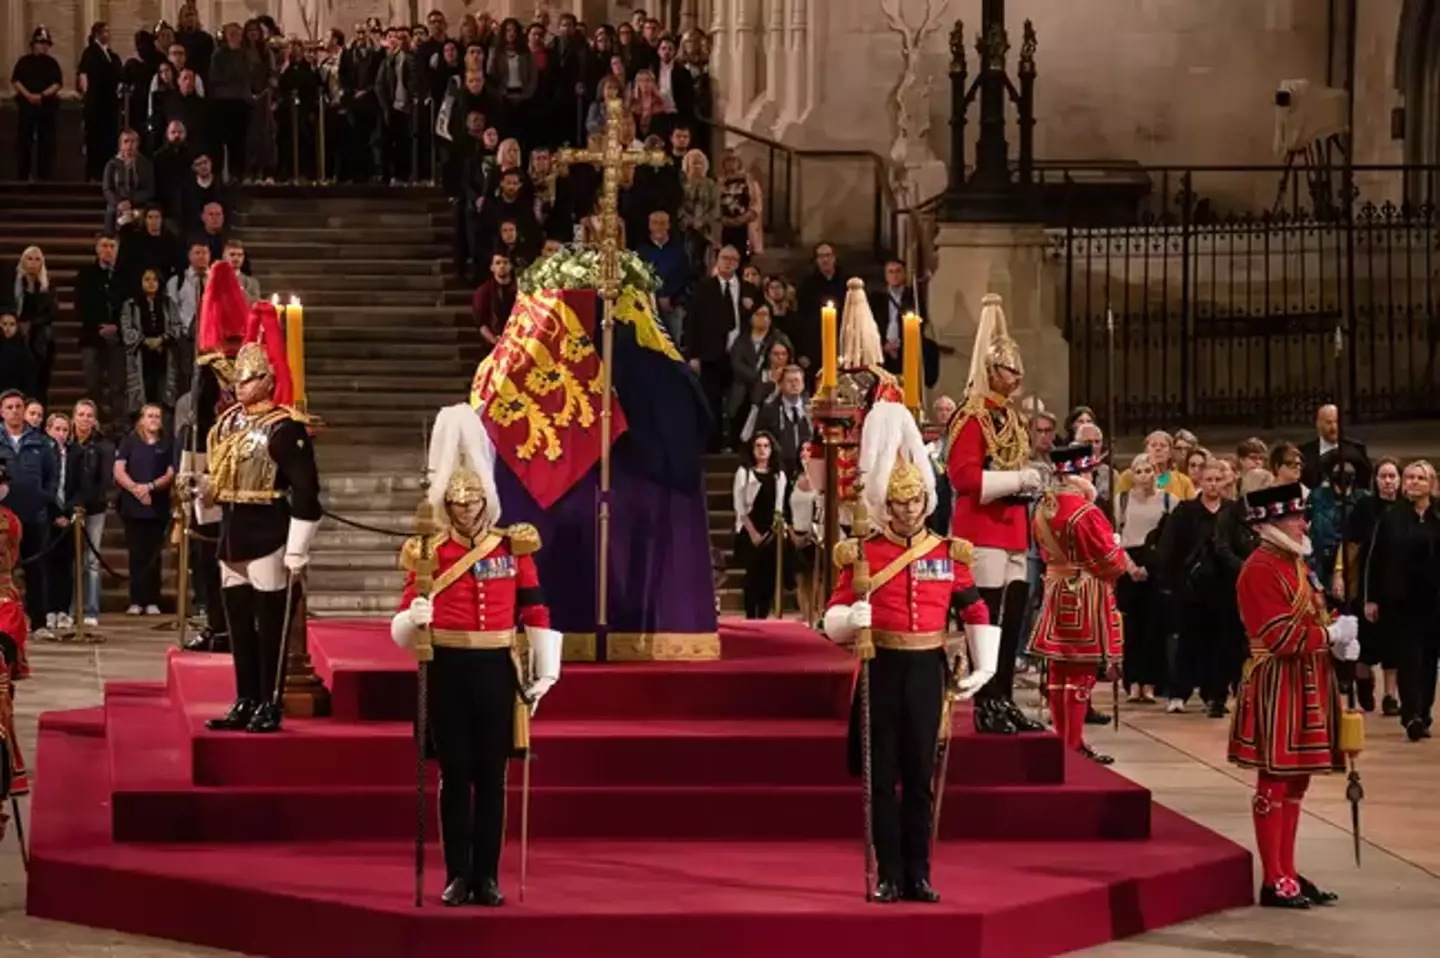 The Queen's coffin is surrounded by guards.